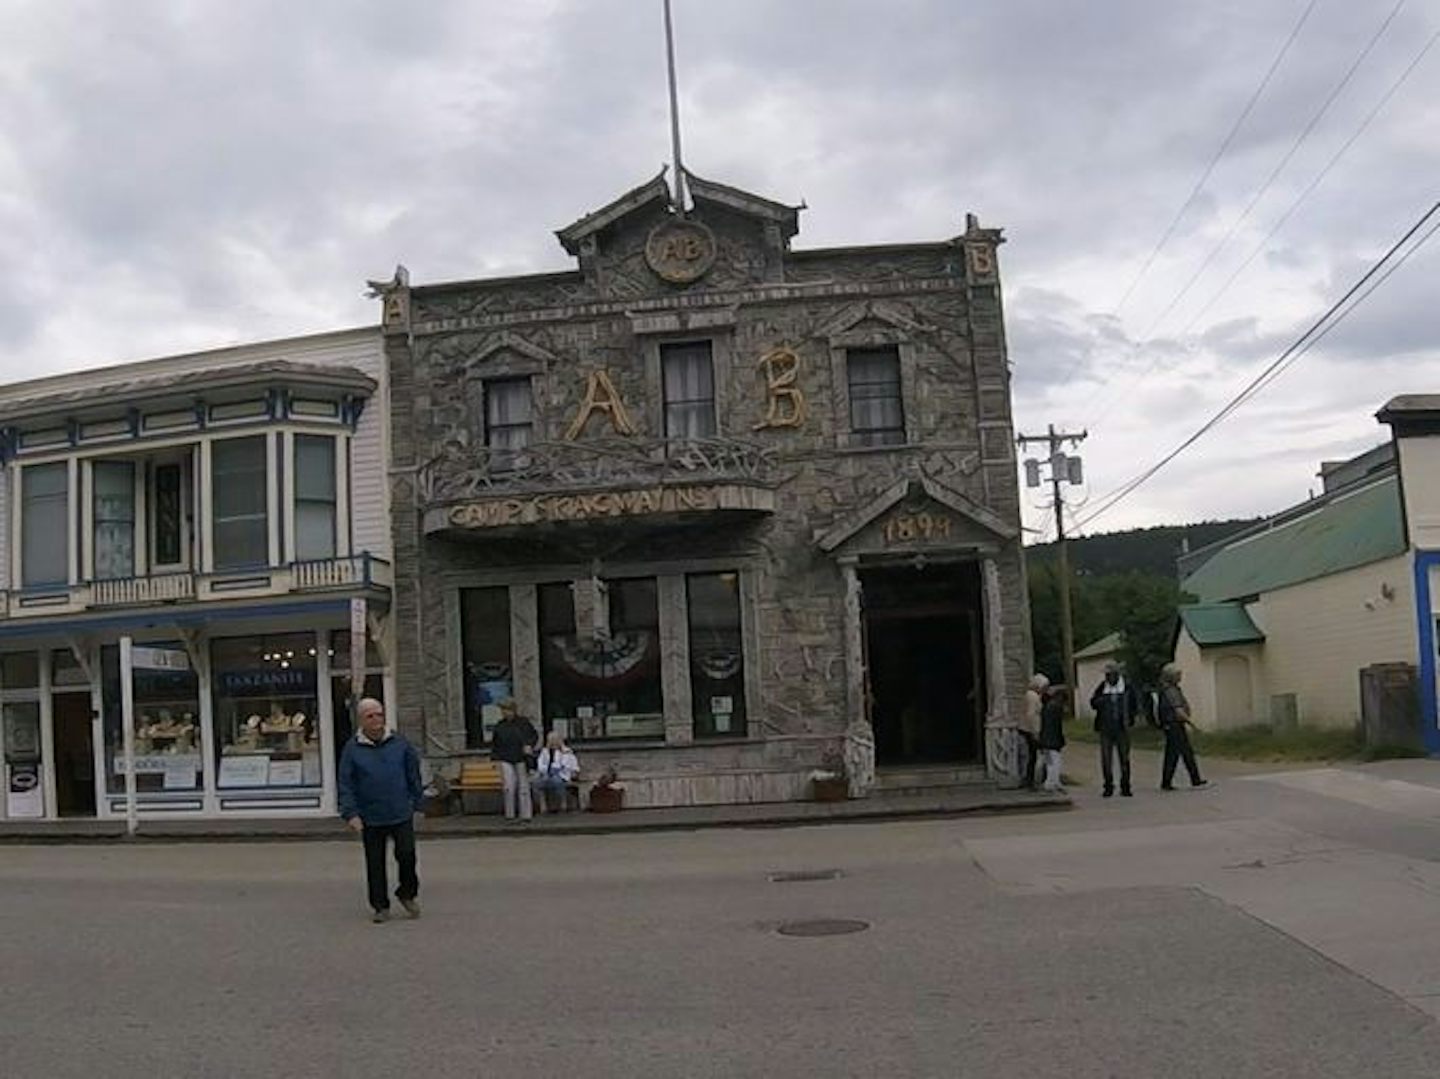 The Artic Brotherhood Building is the most photographed building in Alaska.